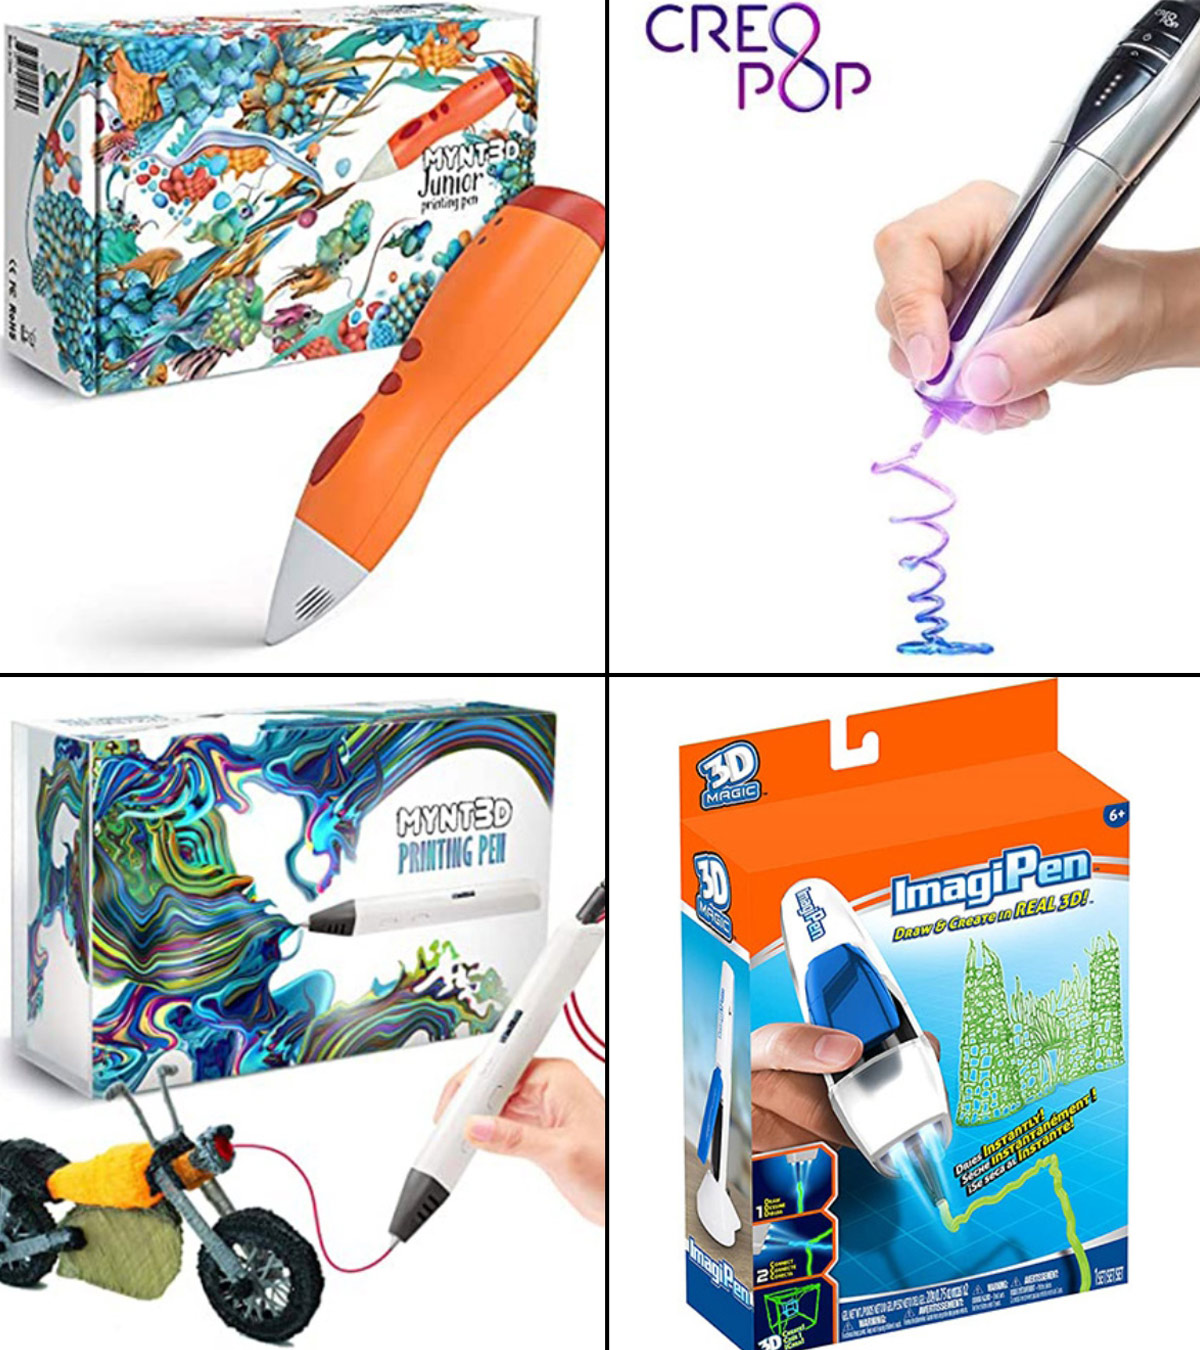 3D Pen for Kids bring their Drawings to Life